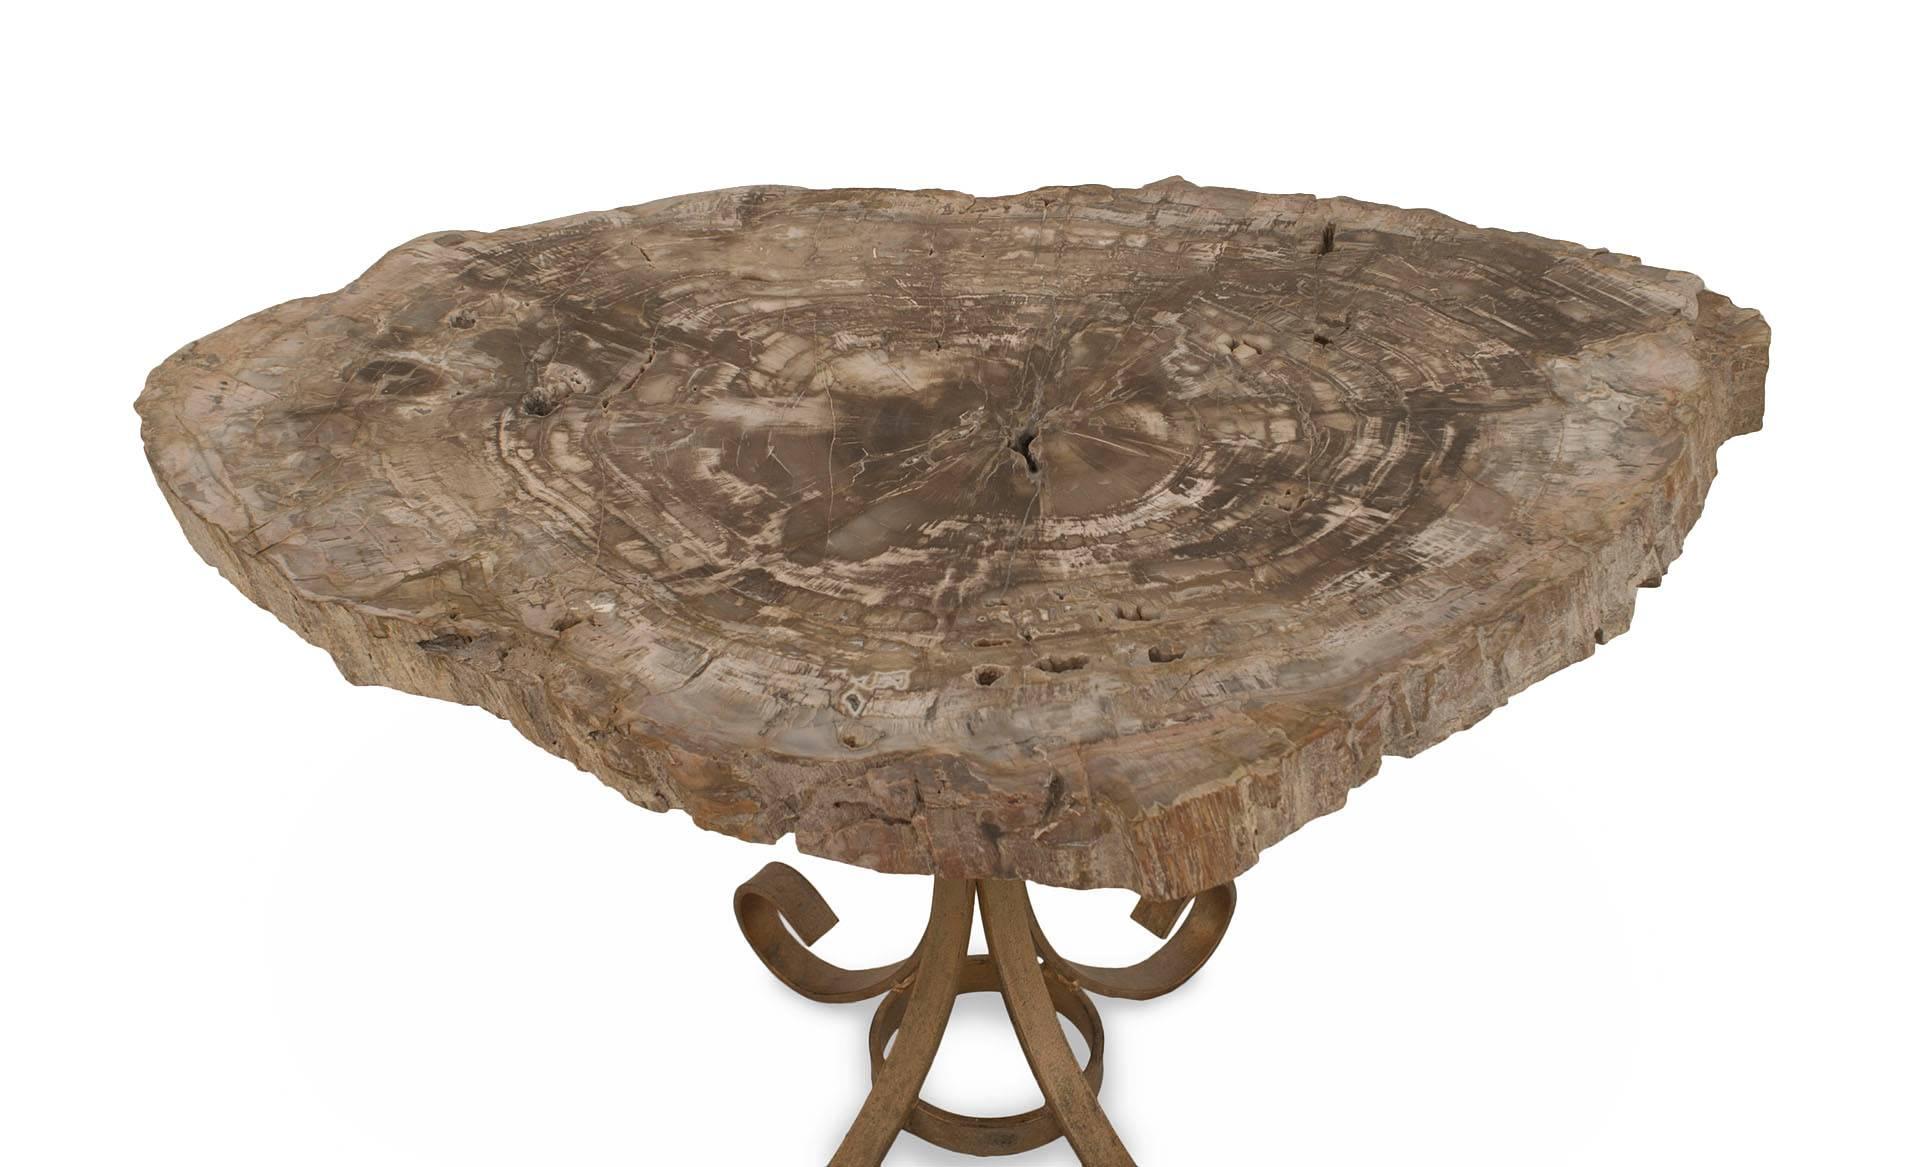 Post-War Design low table with a petrified wood free form top resting on a gold painted metal base with 4 scroll legs
